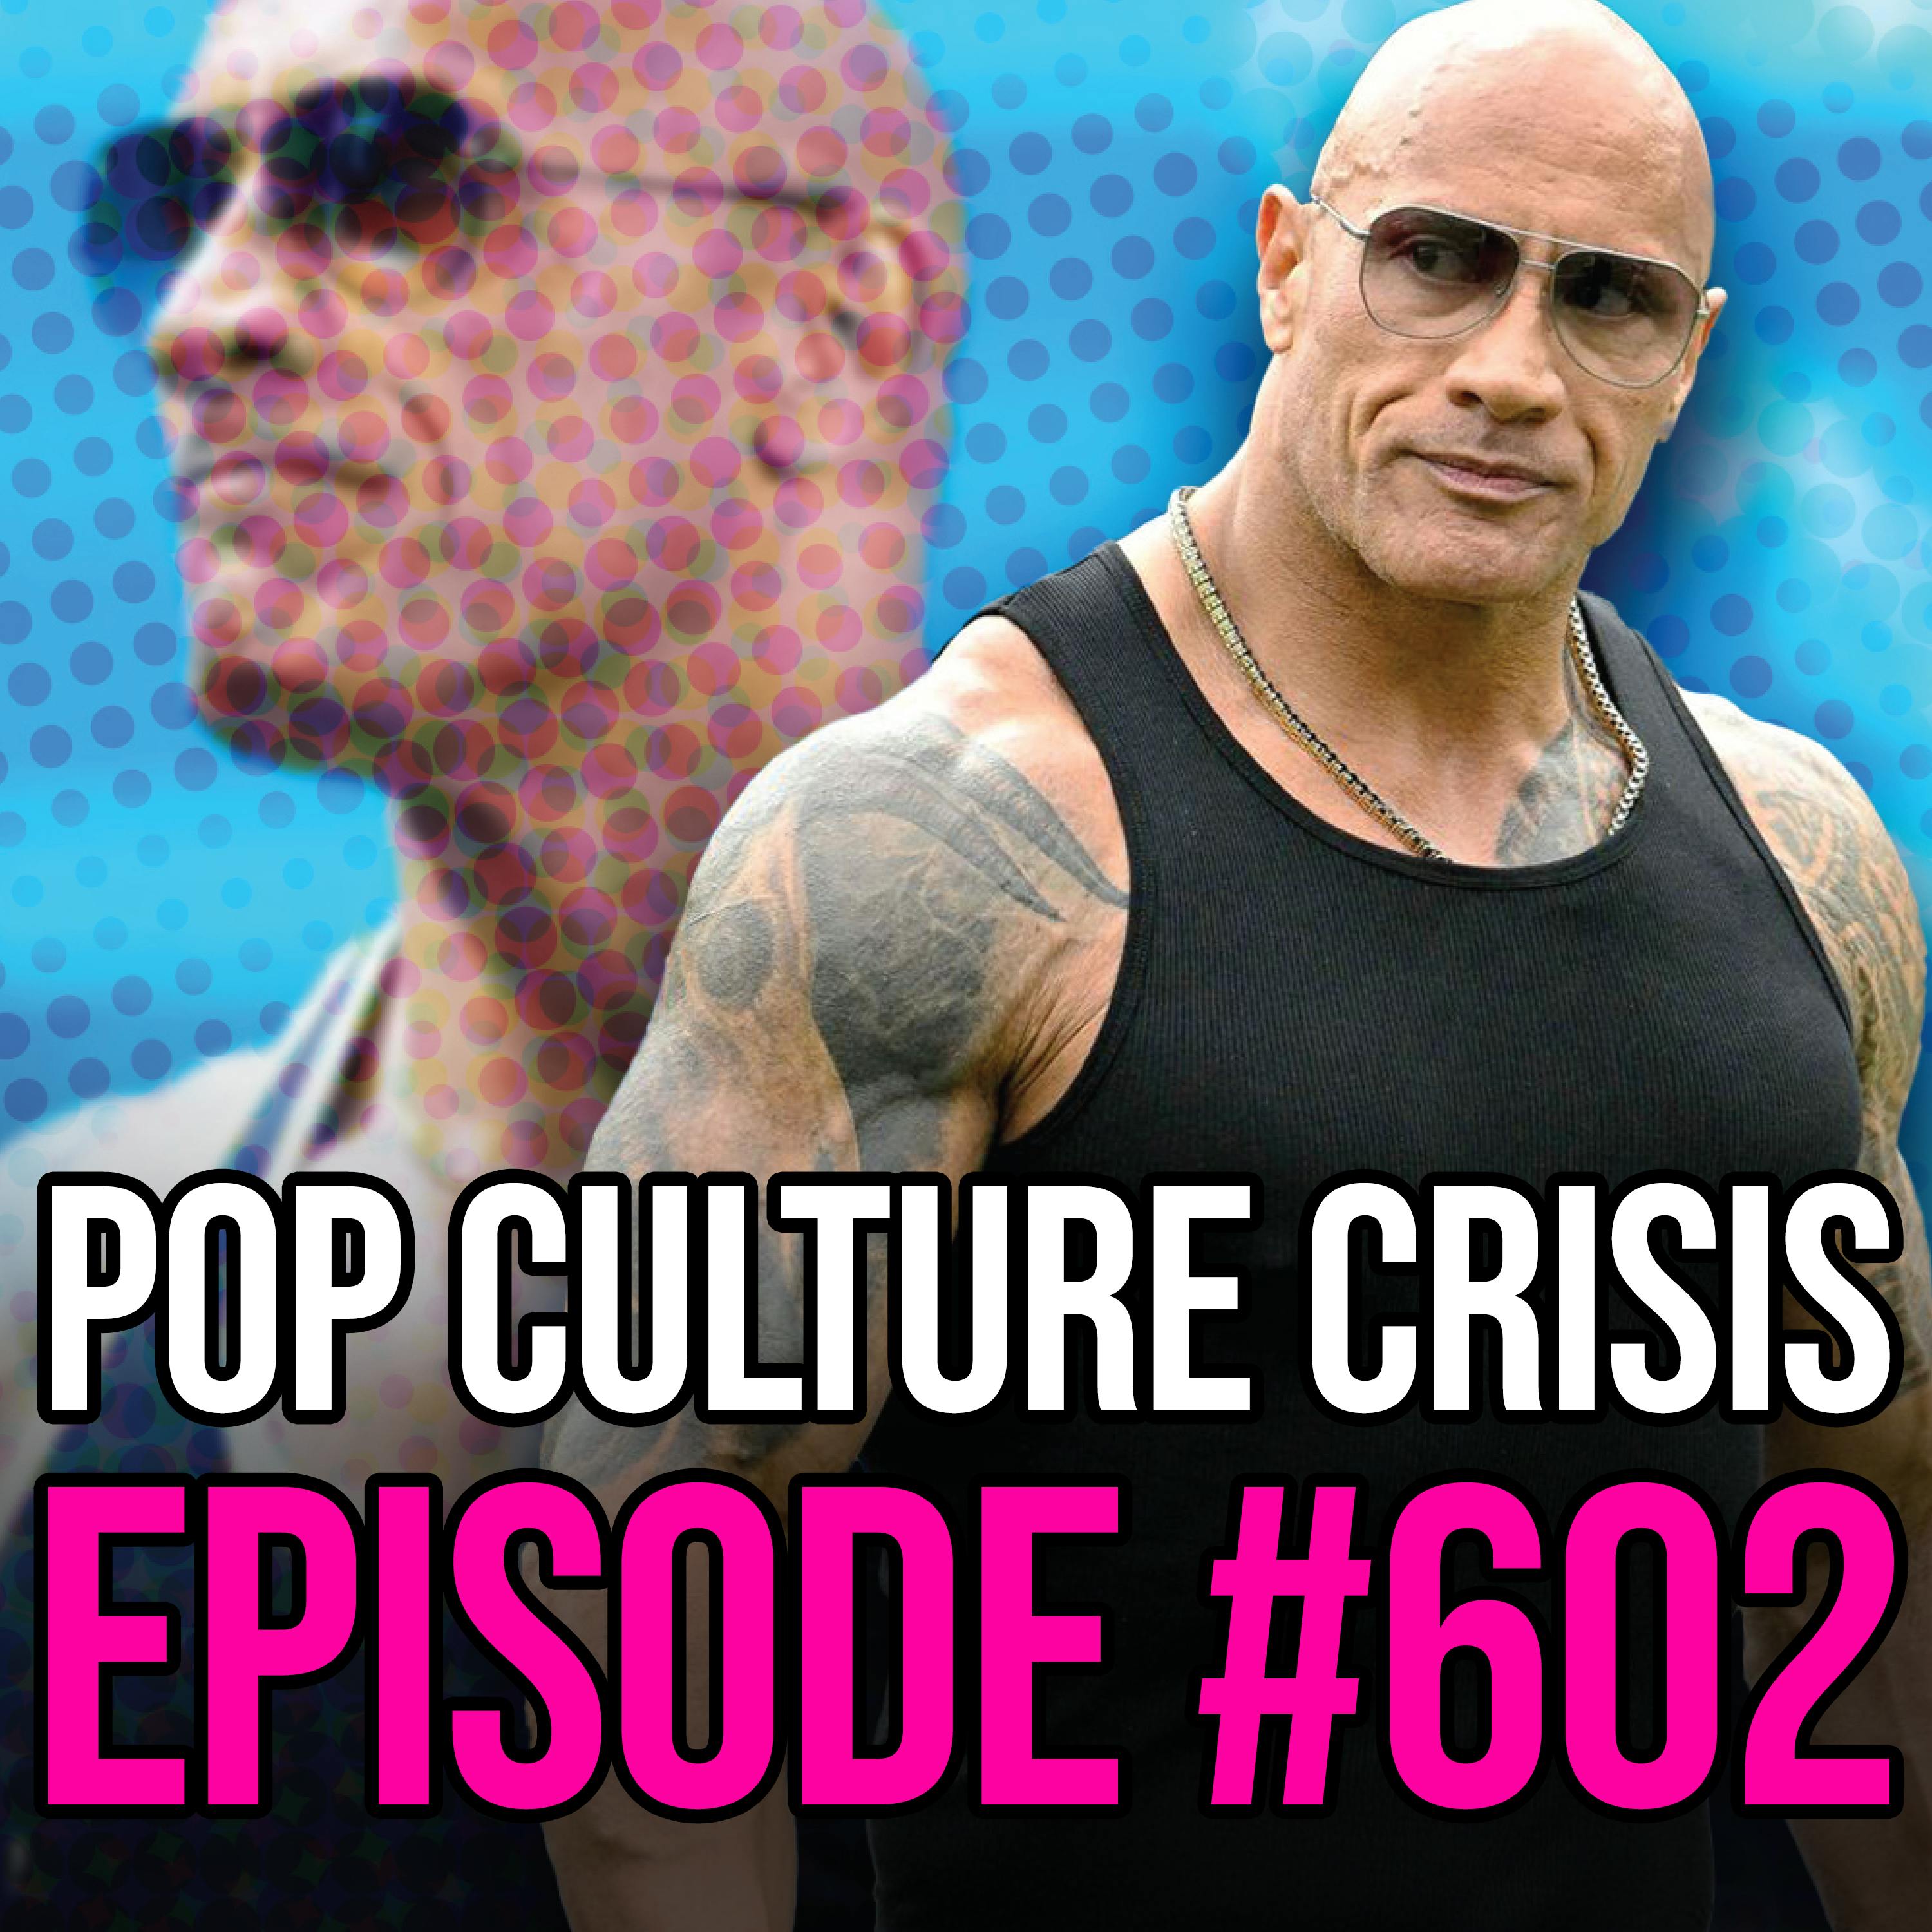 EPISODE 602: The Rock Goes Full Diva? Russell Brand Baptism, Insanity at 'Fall Guy' Premiere